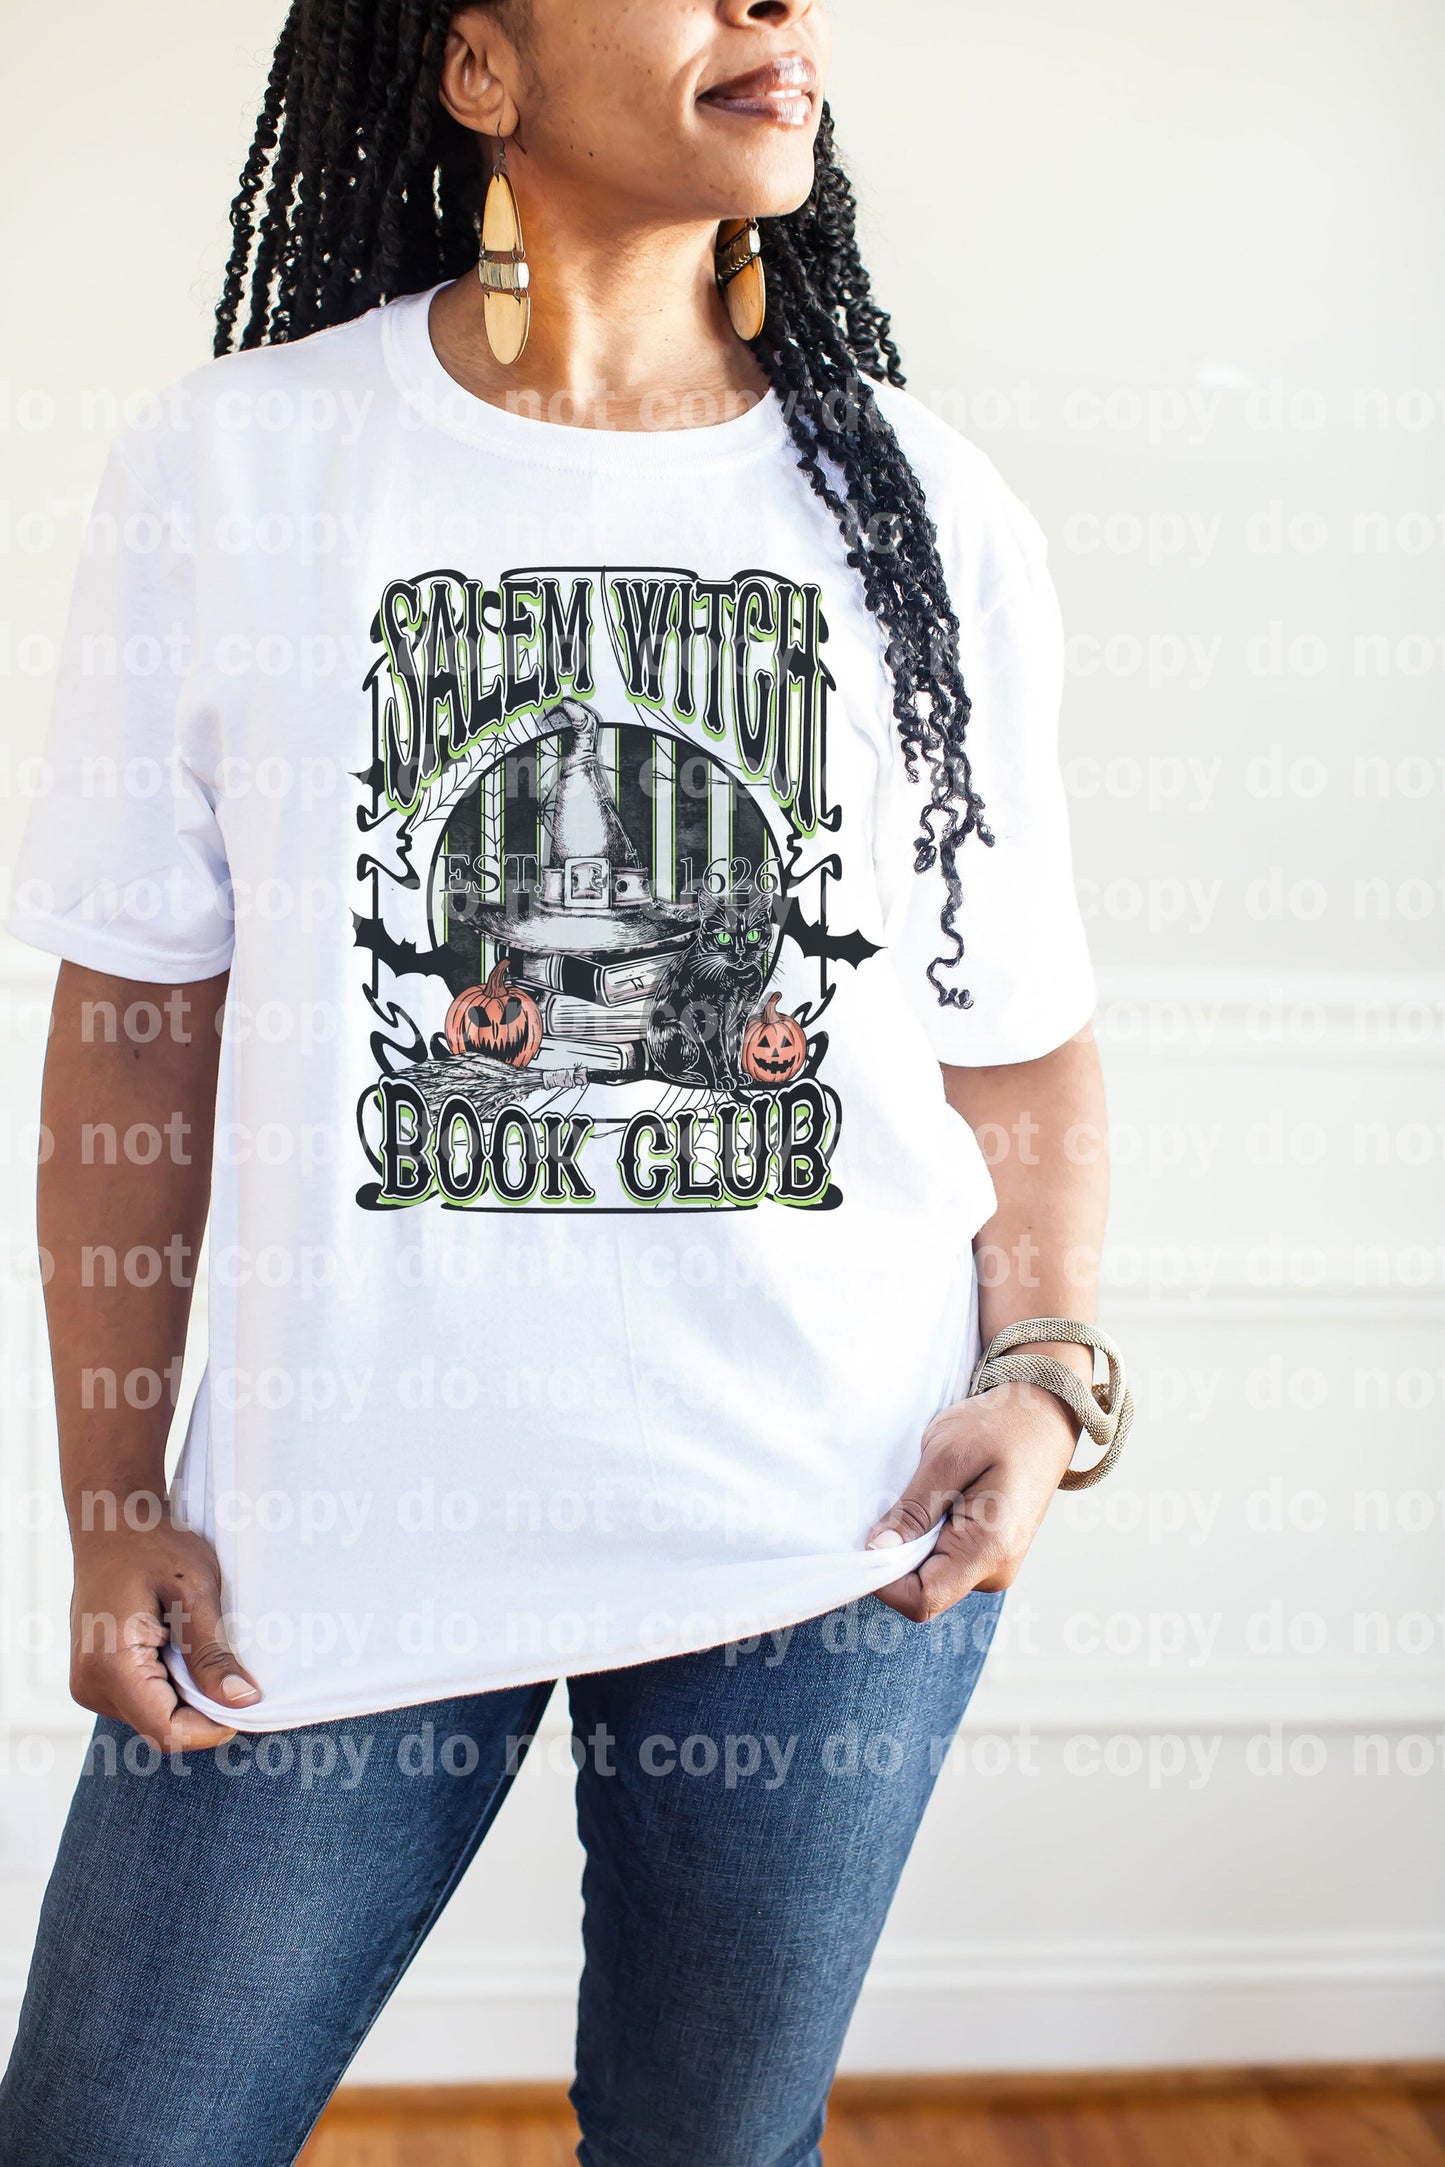 Salem Witch Club with Pocket Option Dream Print or Sublimation Print